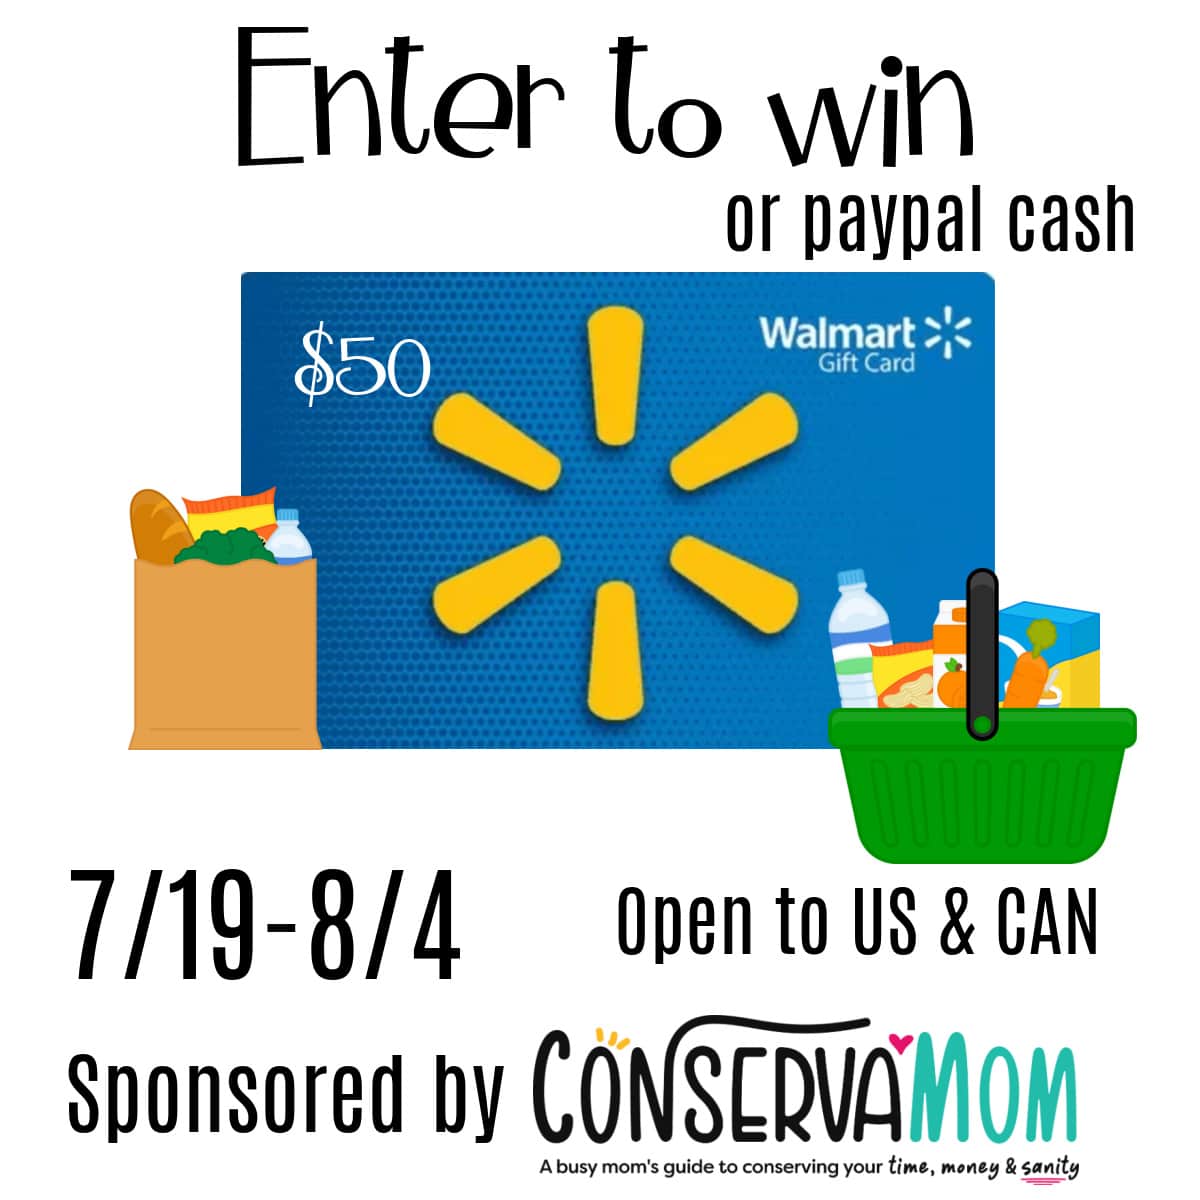 Enter to Win $50 Walmart Gift Card or Paypal Cash Giveaway